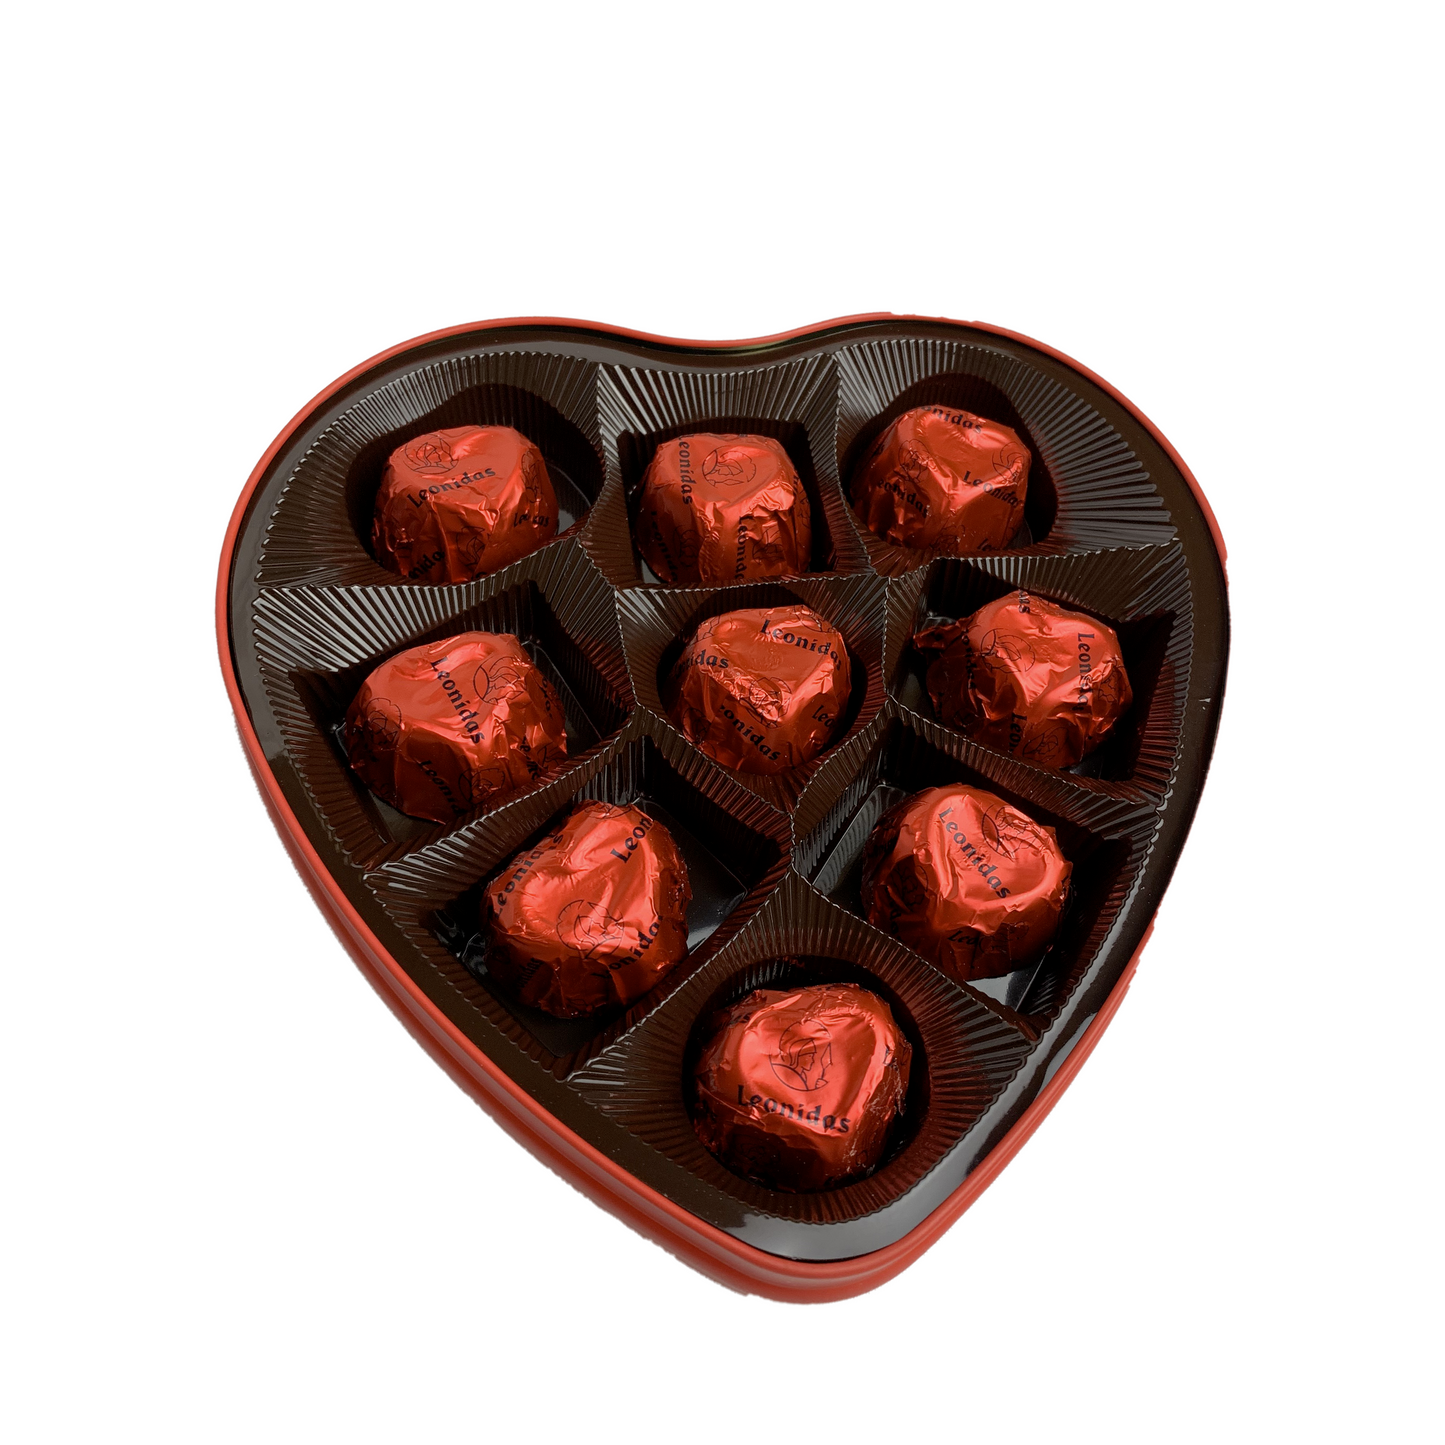 Heart filled with 9 Leonidas chocolates (metal box) - Valentine's Day